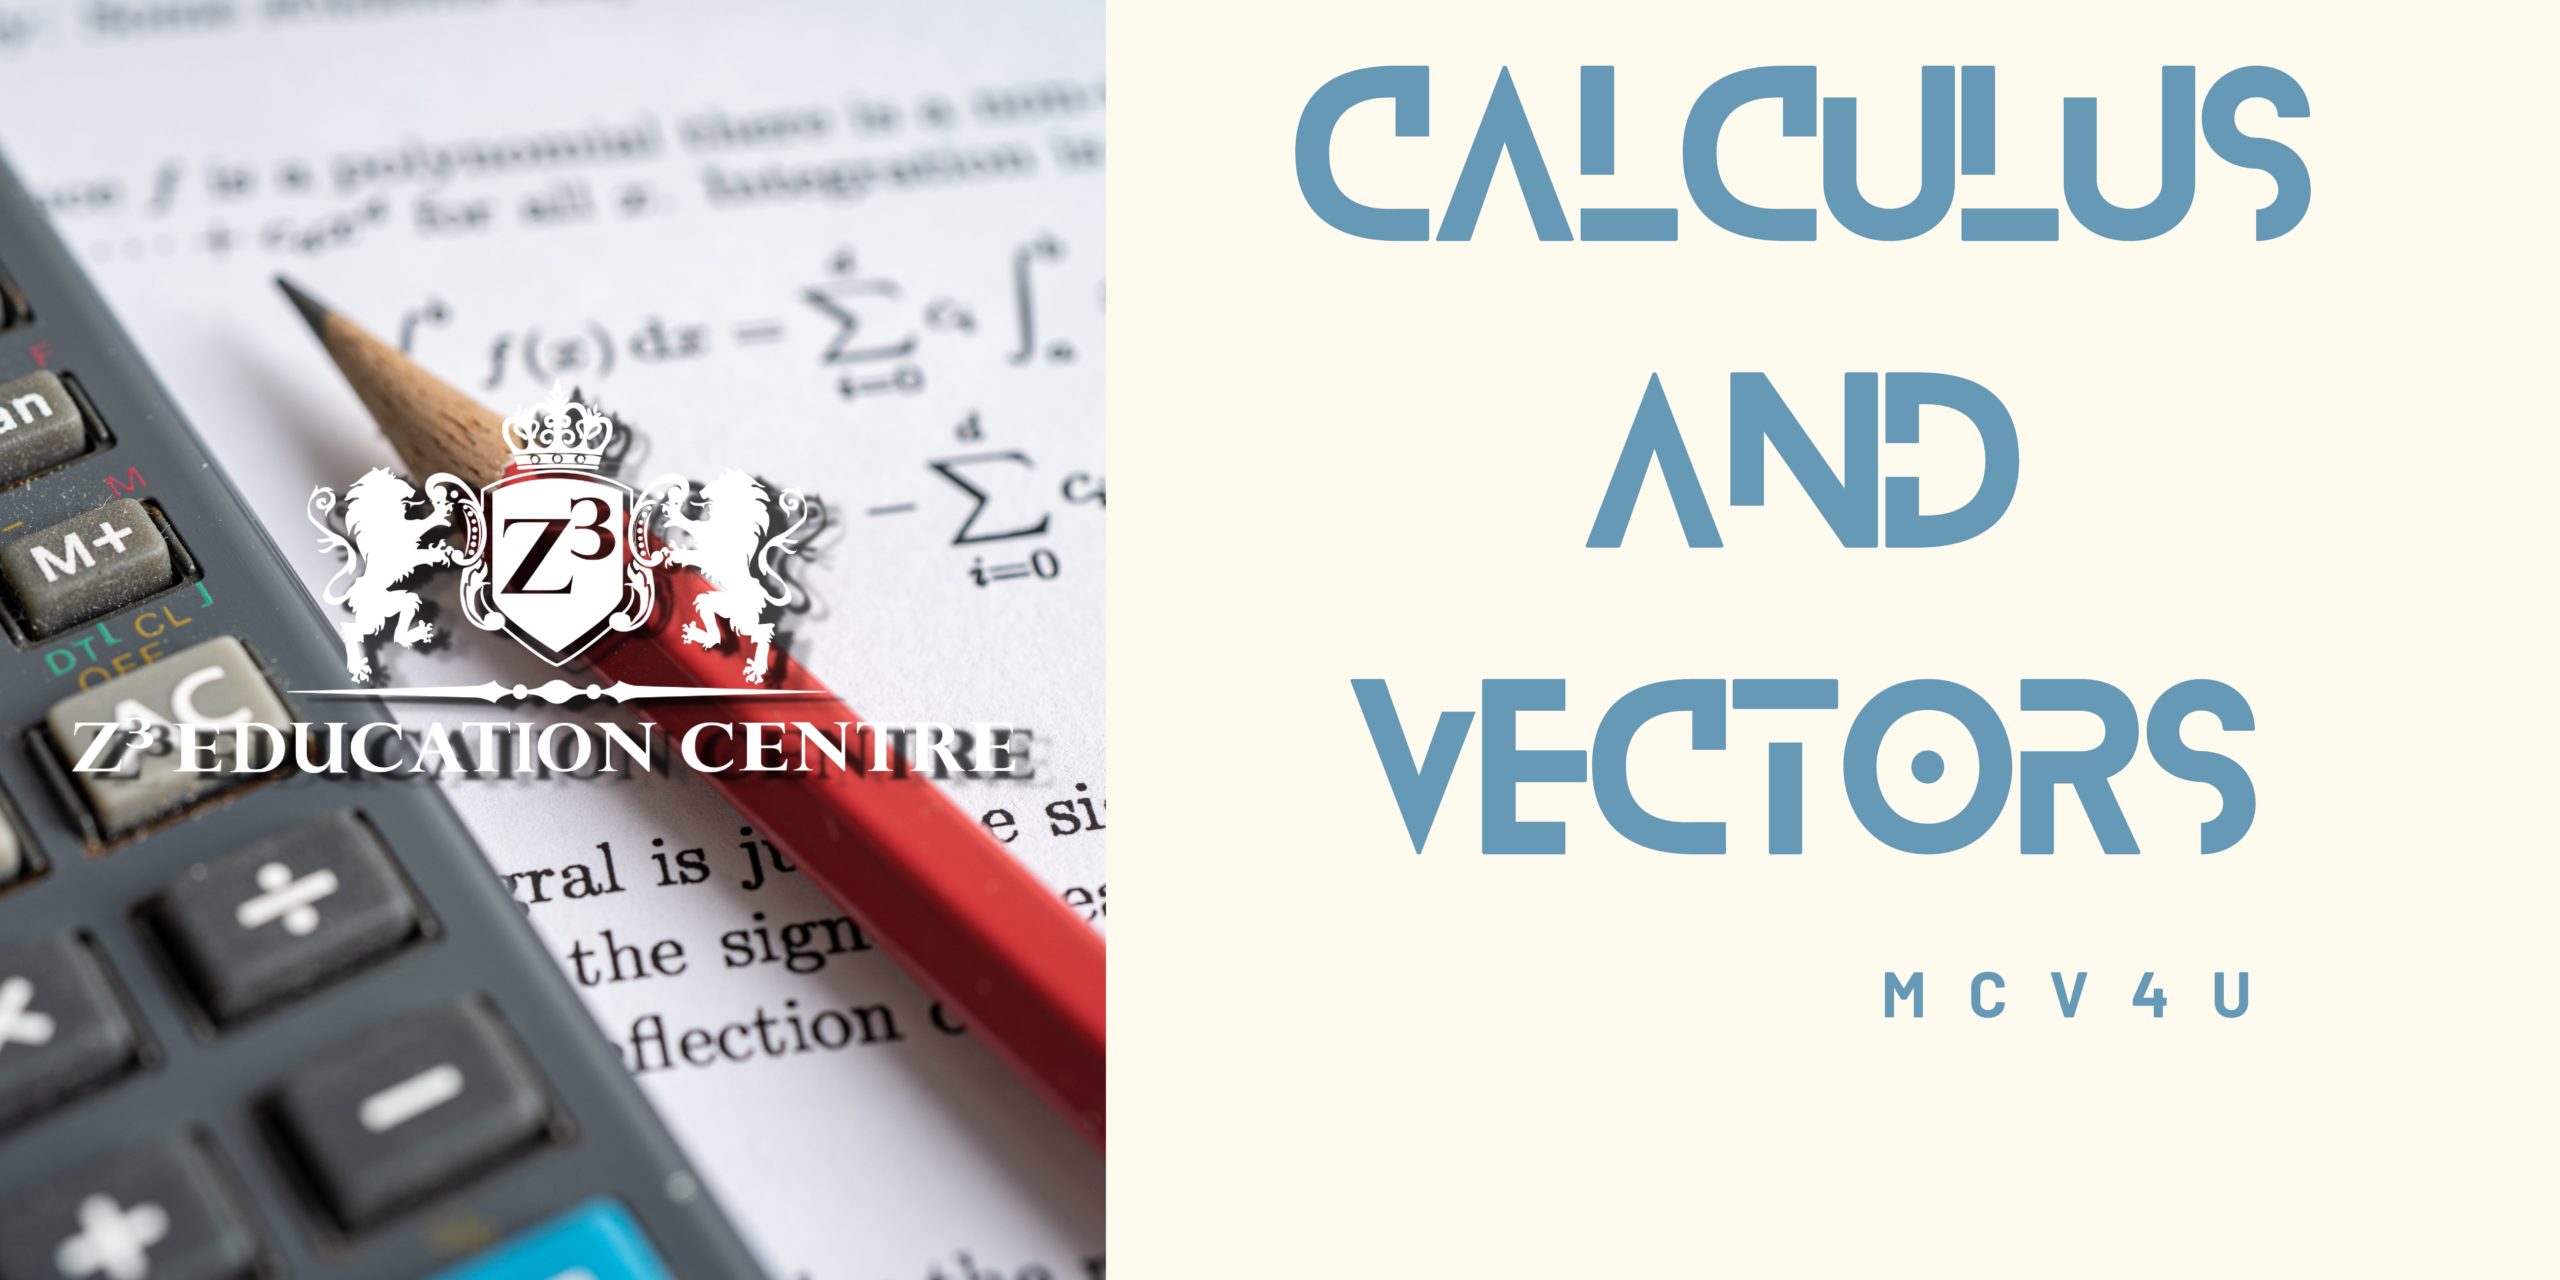 Calculus and Vectors